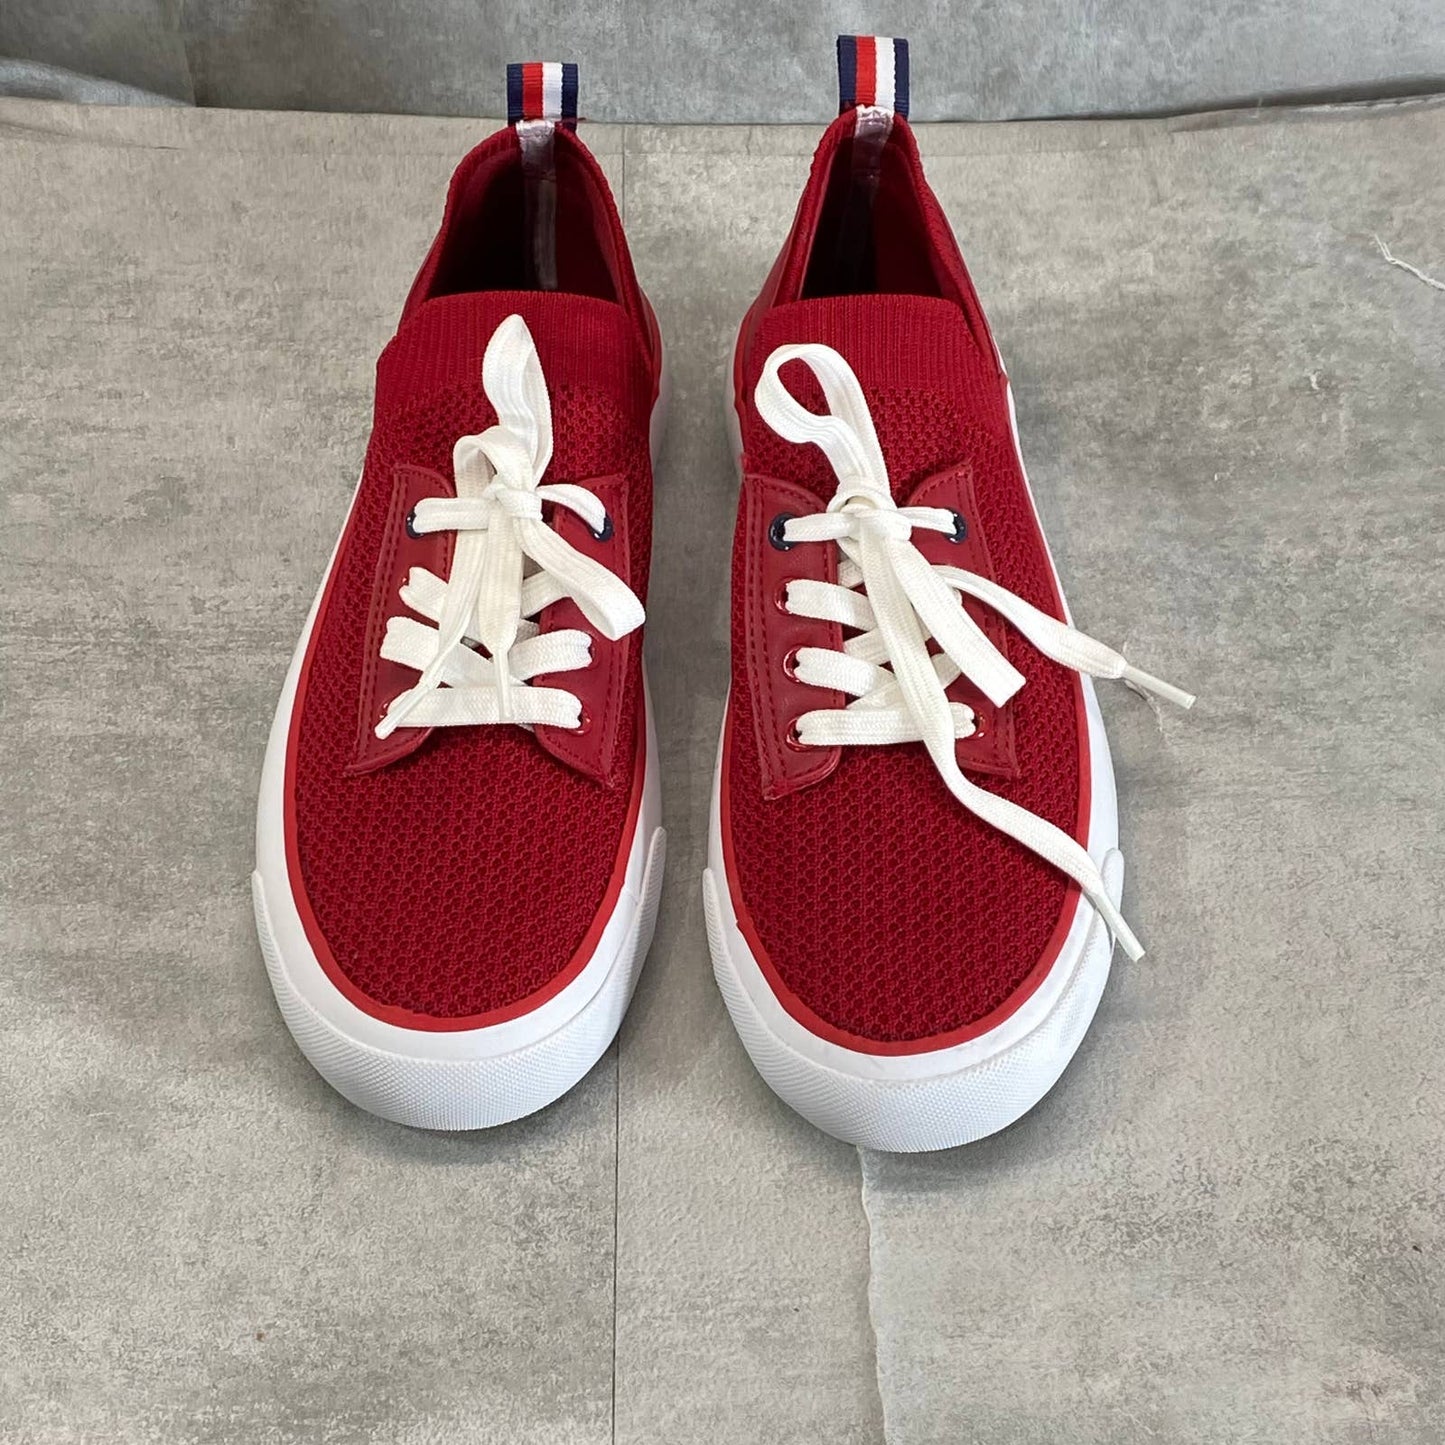 TOMMY HILFIGER Women's Medium Red Fabric Gessie Stretch Lace-Up Sneakers SZ 7.5